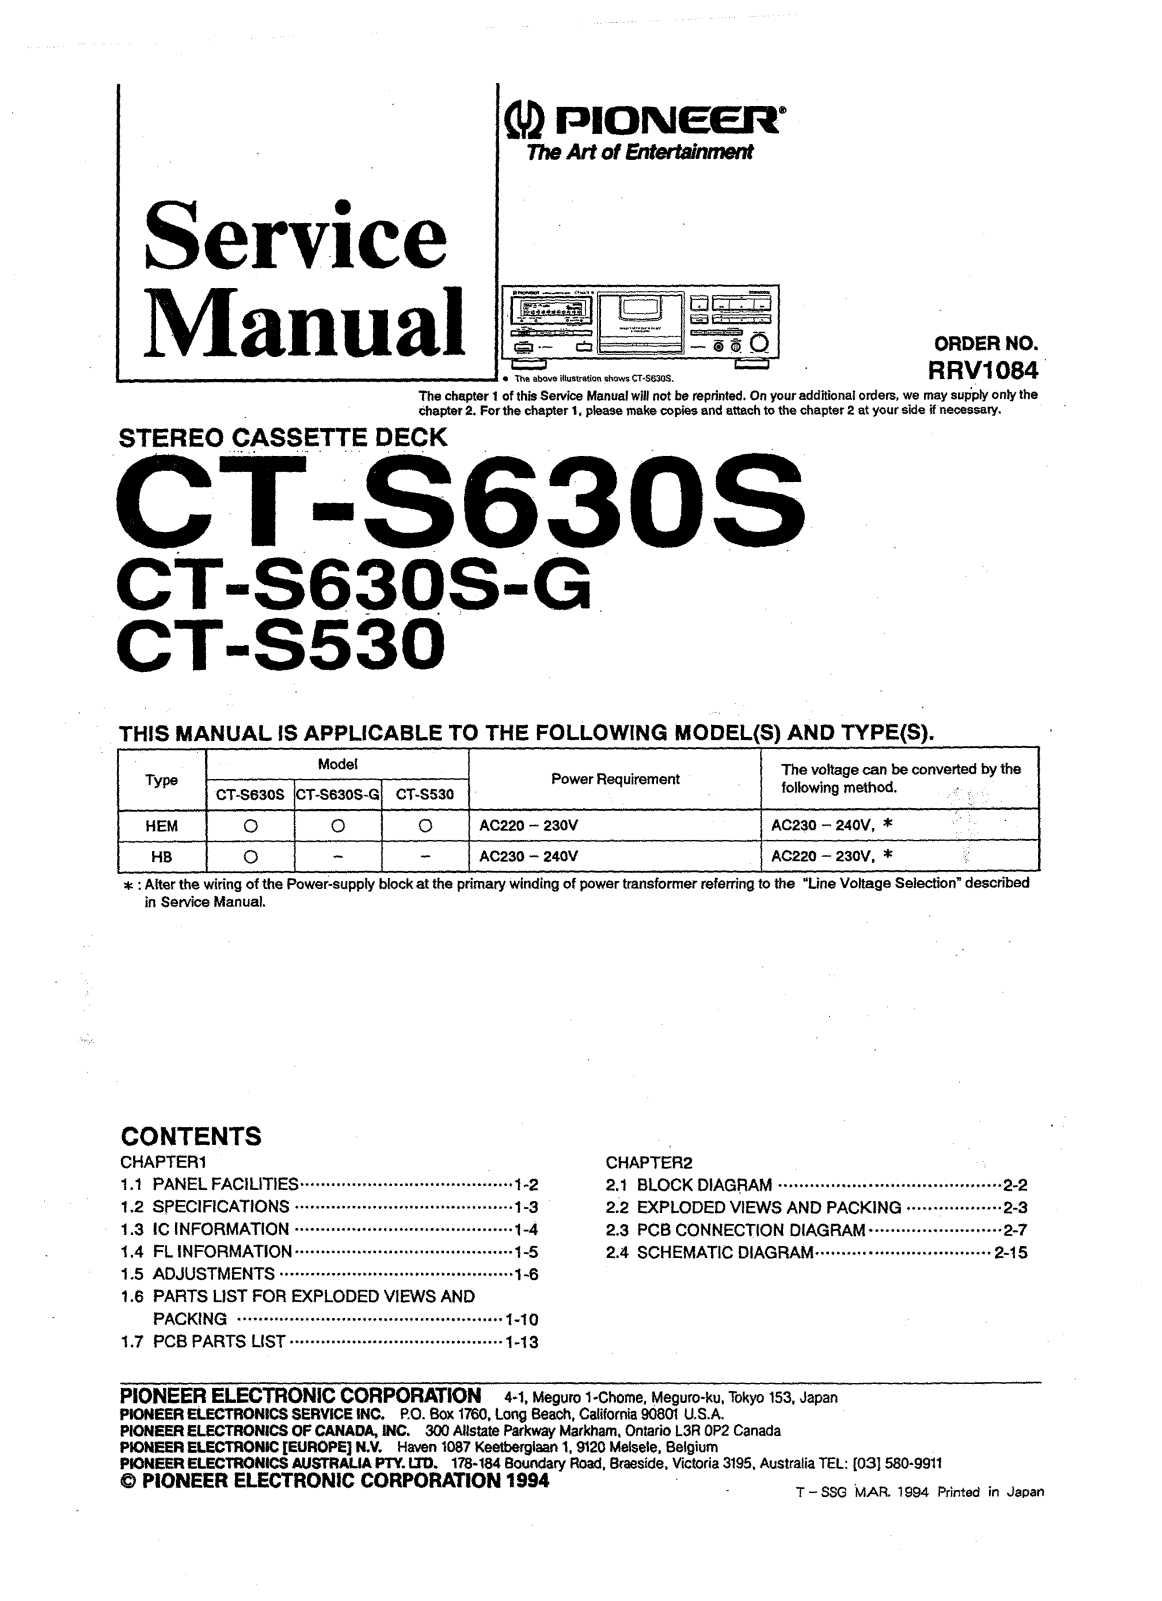 Pioneer CTS-530, CTS-630-S, CTS-630-SG Service manual